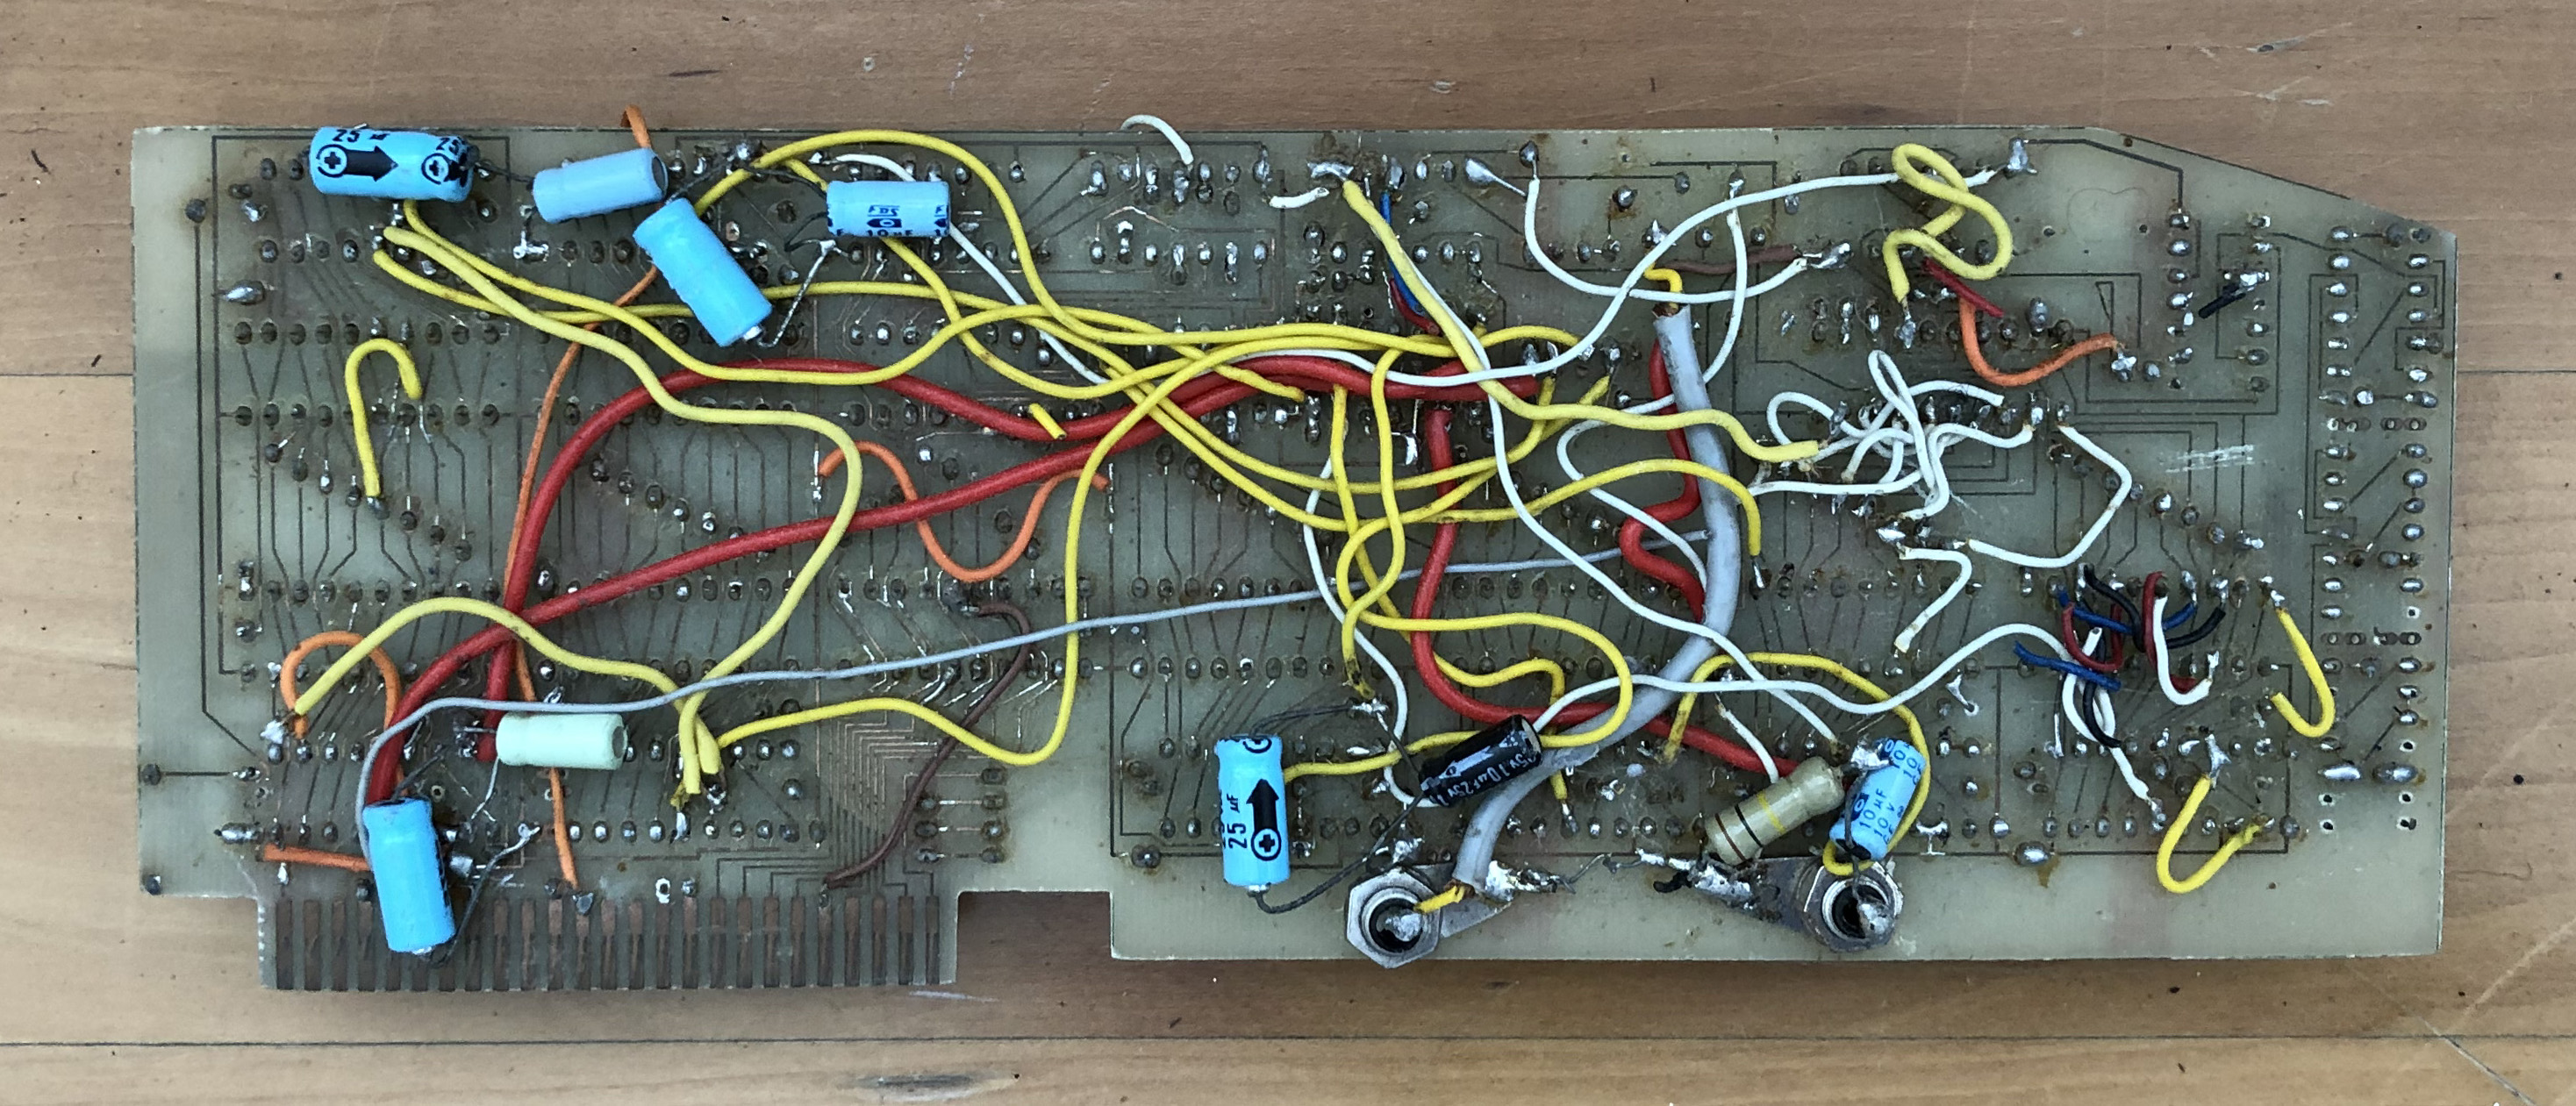 Interface board number 1: tracks side